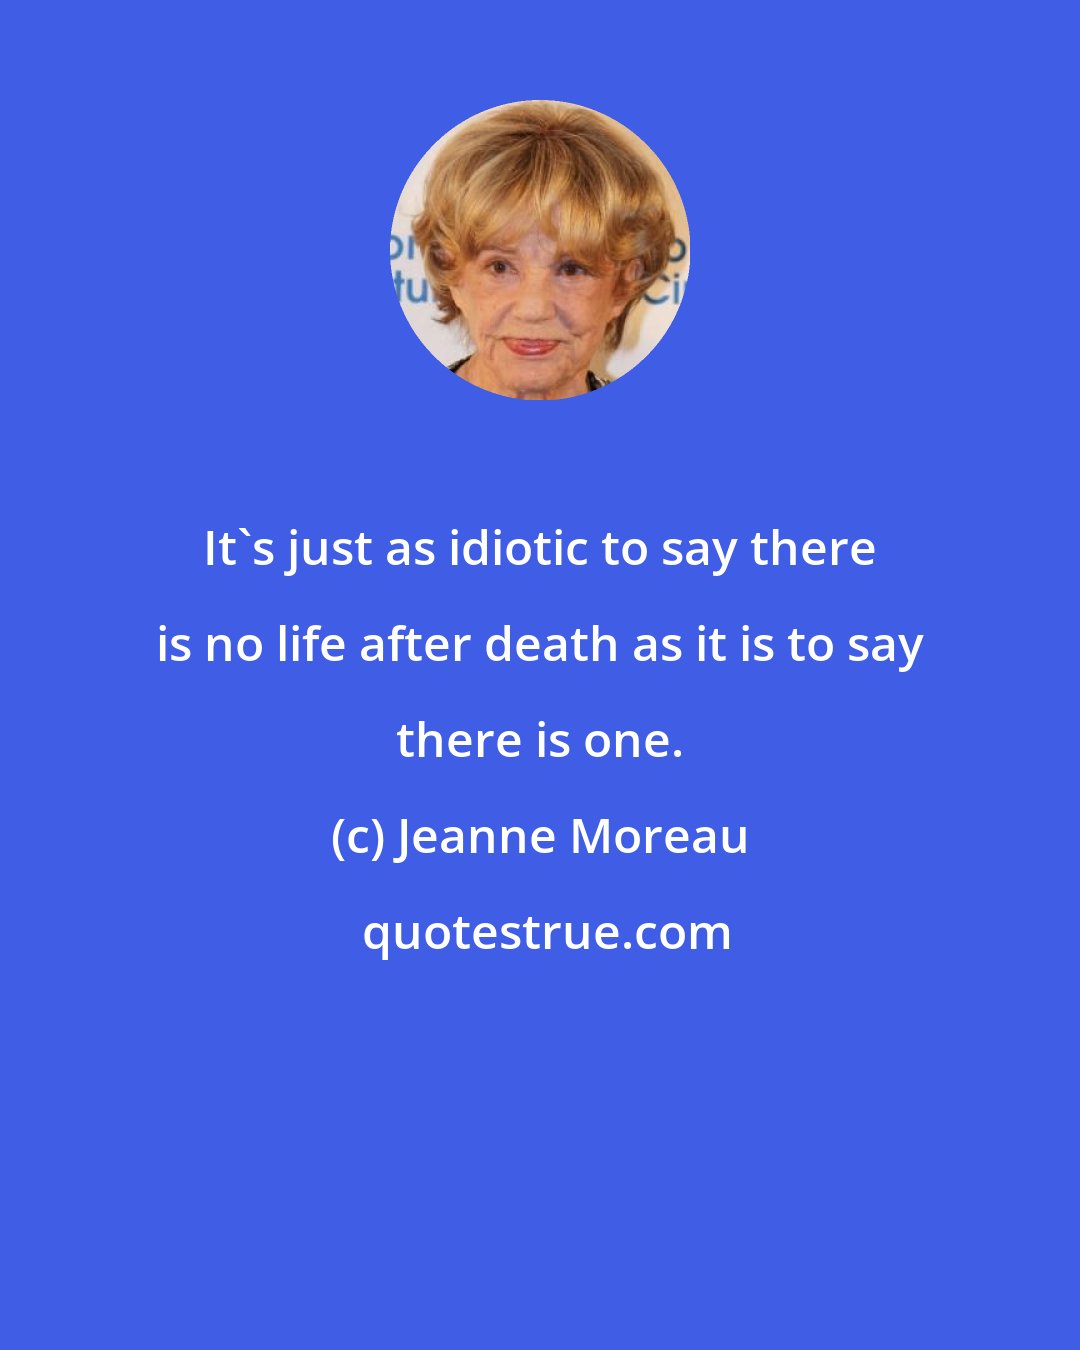 Jeanne Moreau: It's just as idiotic to say there is no life after death as it is to say there is one.